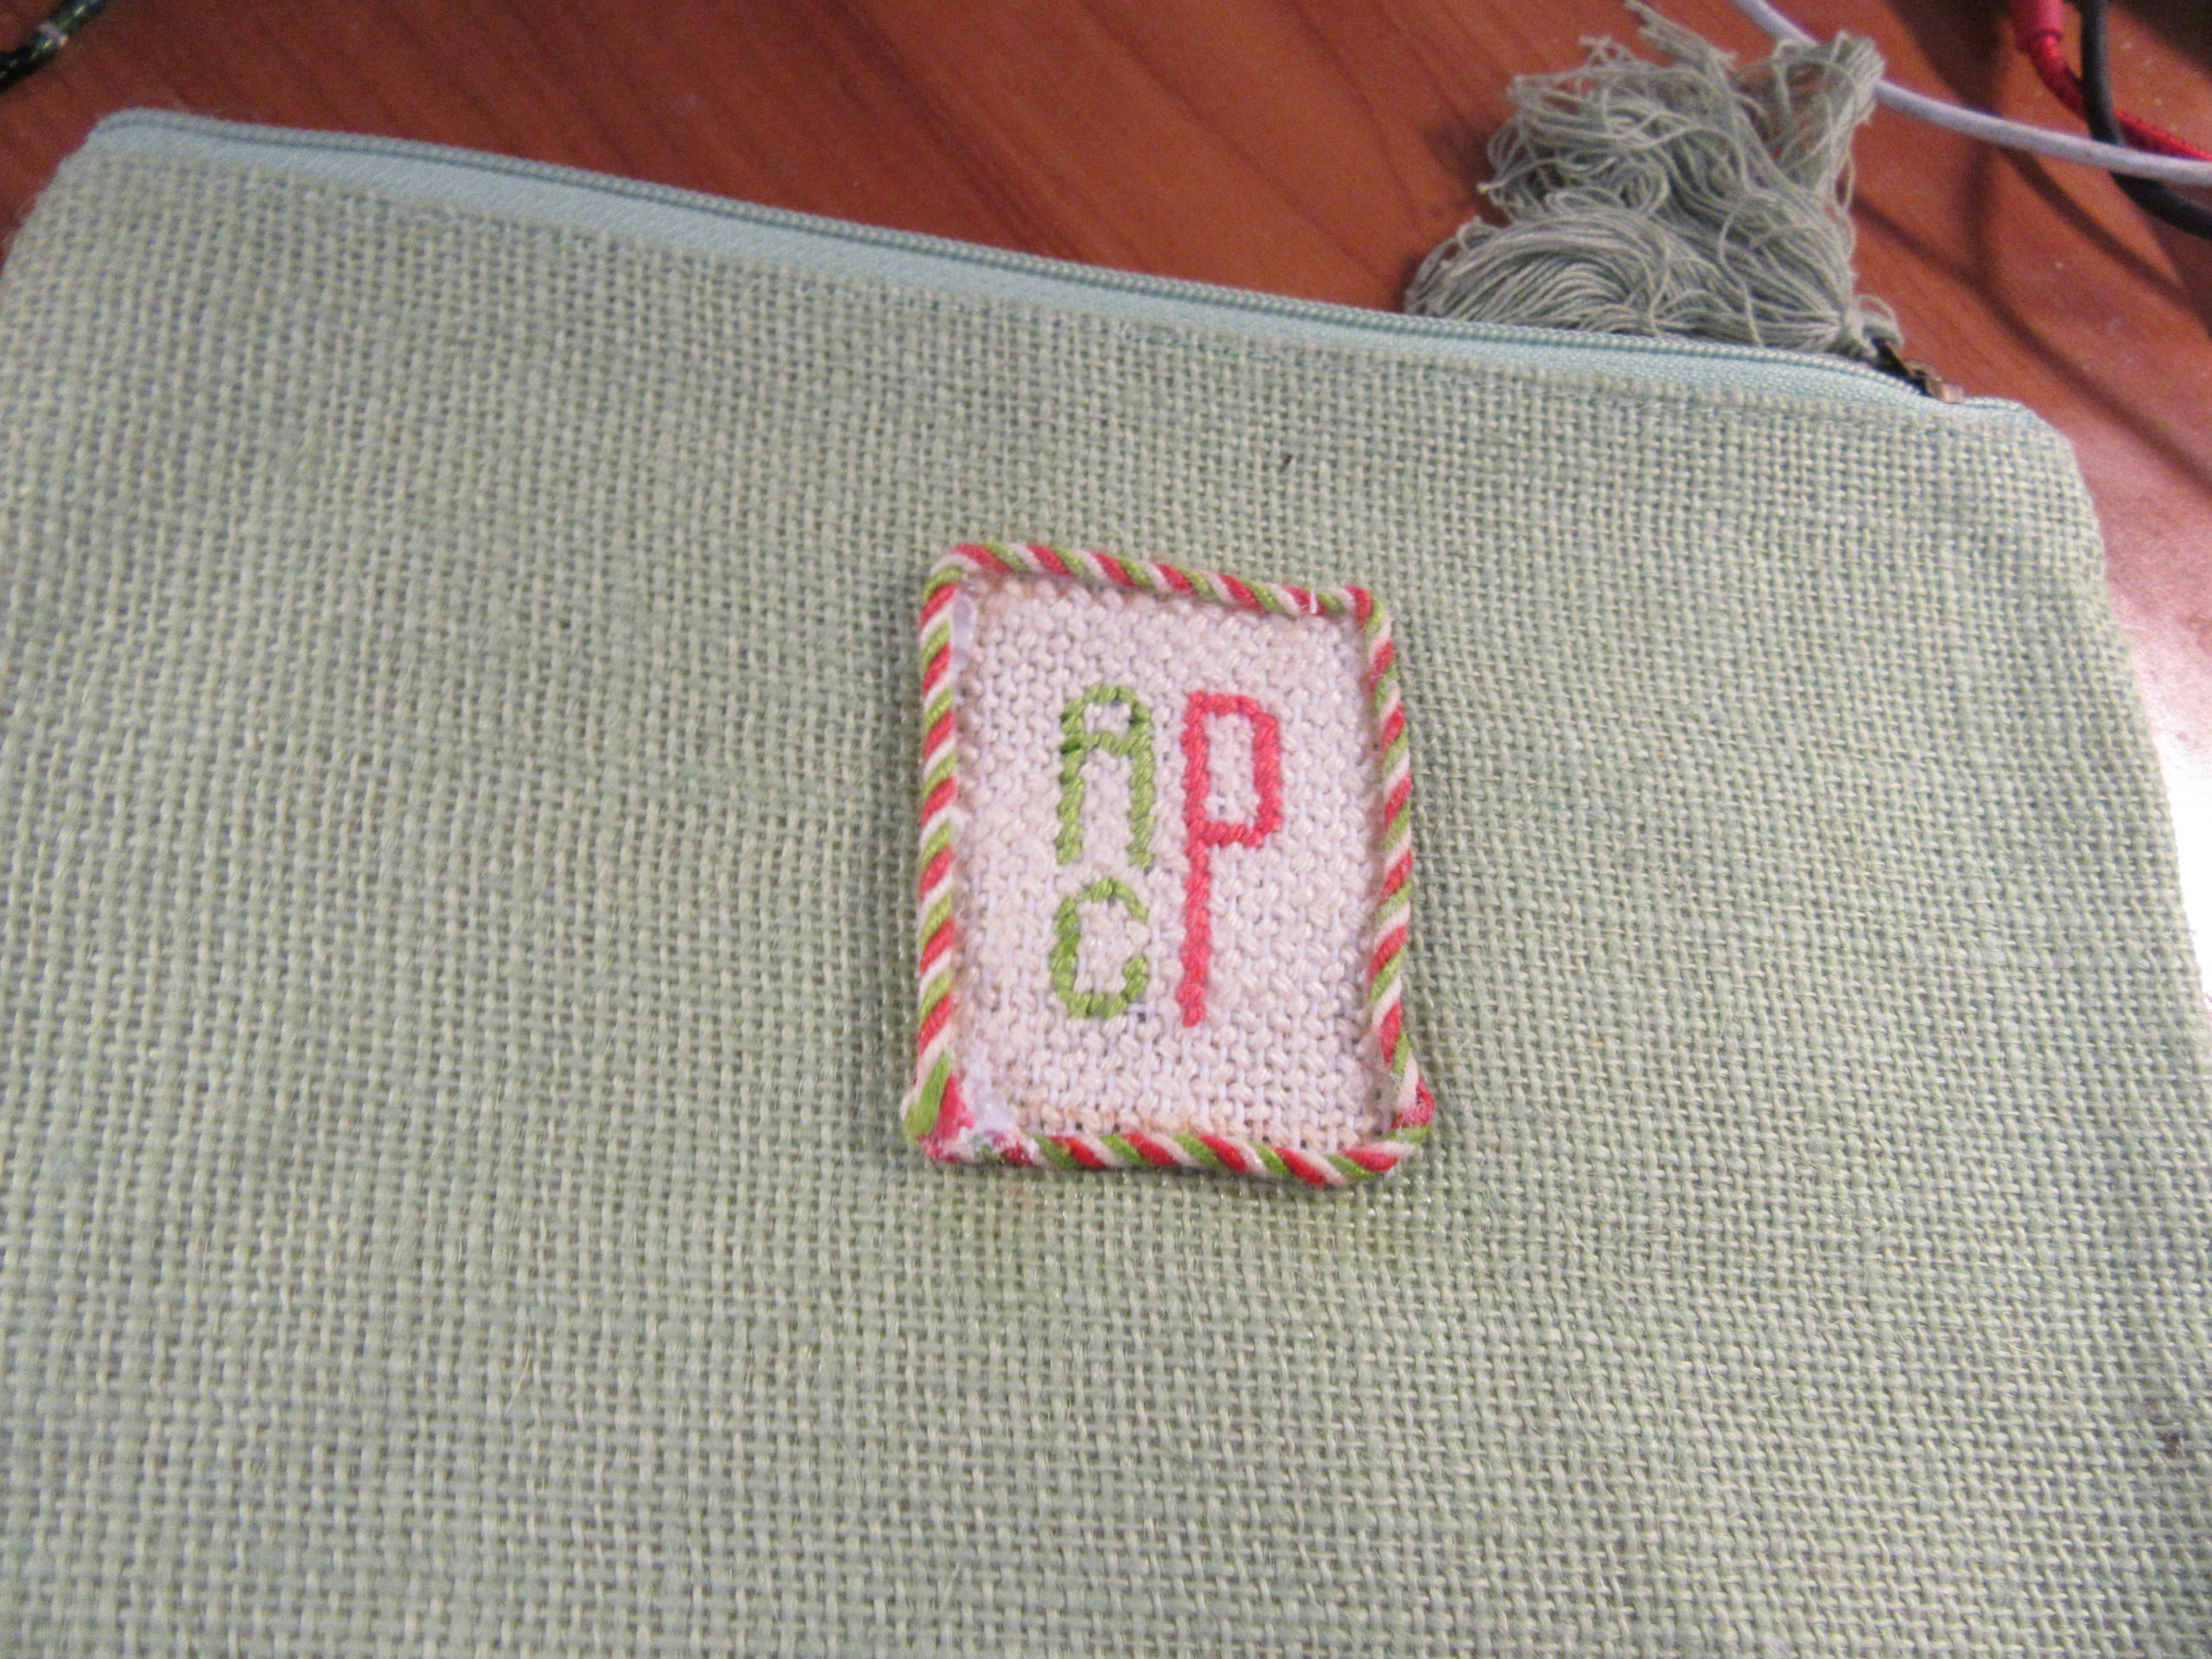 DO IT YOURSELF  Needlepoint by Laura